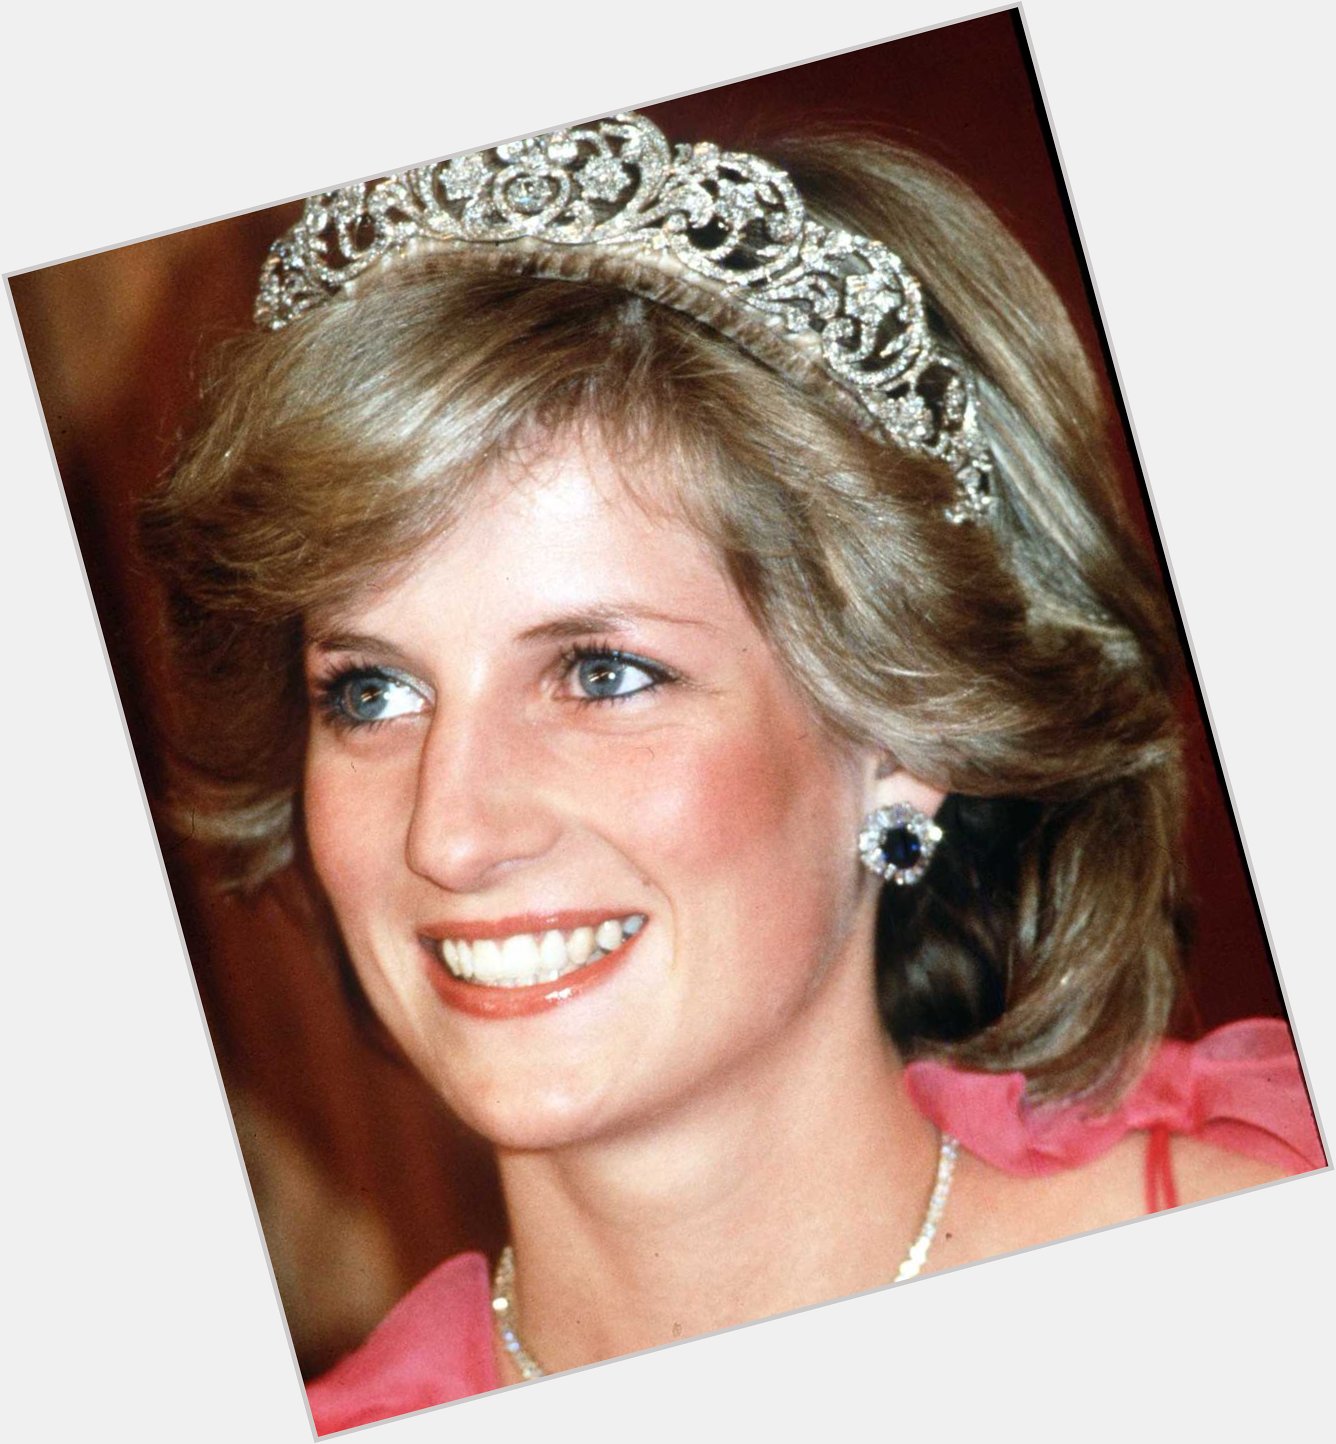 Happy Birthday to the Queen of Hearts, Princess Diana born 1st July 1961. 